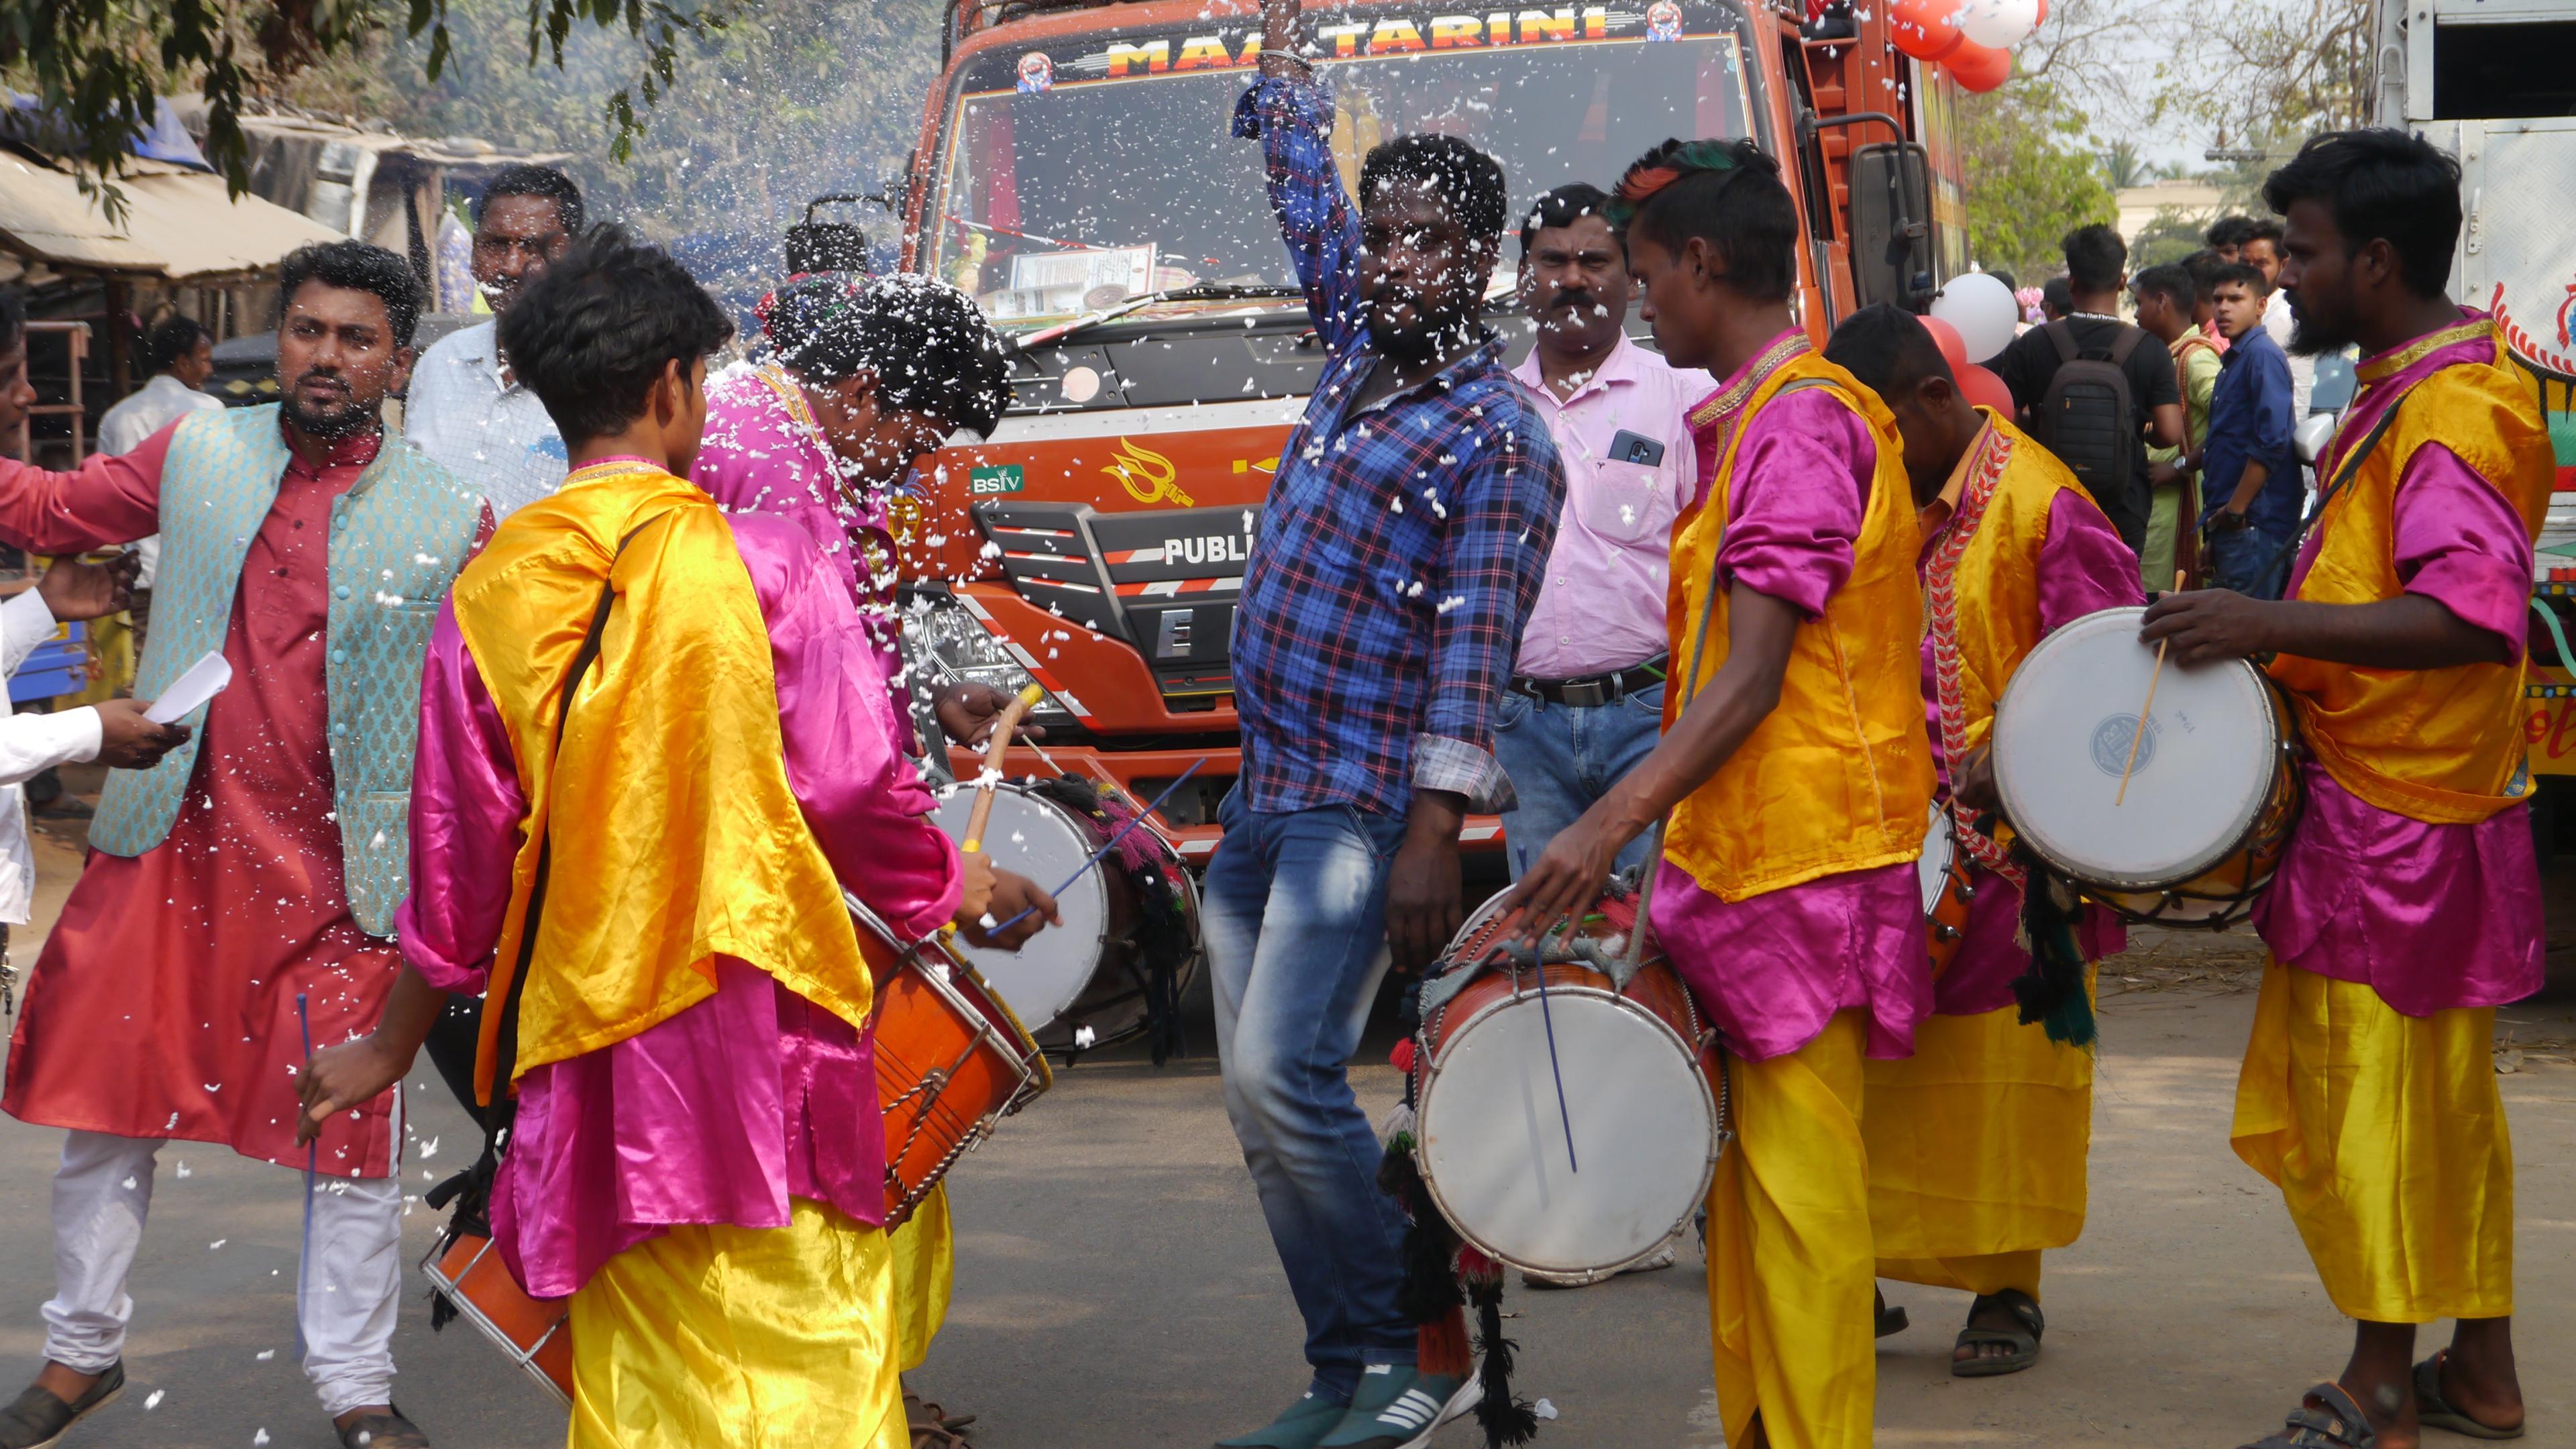 People celebrate, in costumes, with instruments, on India's streets